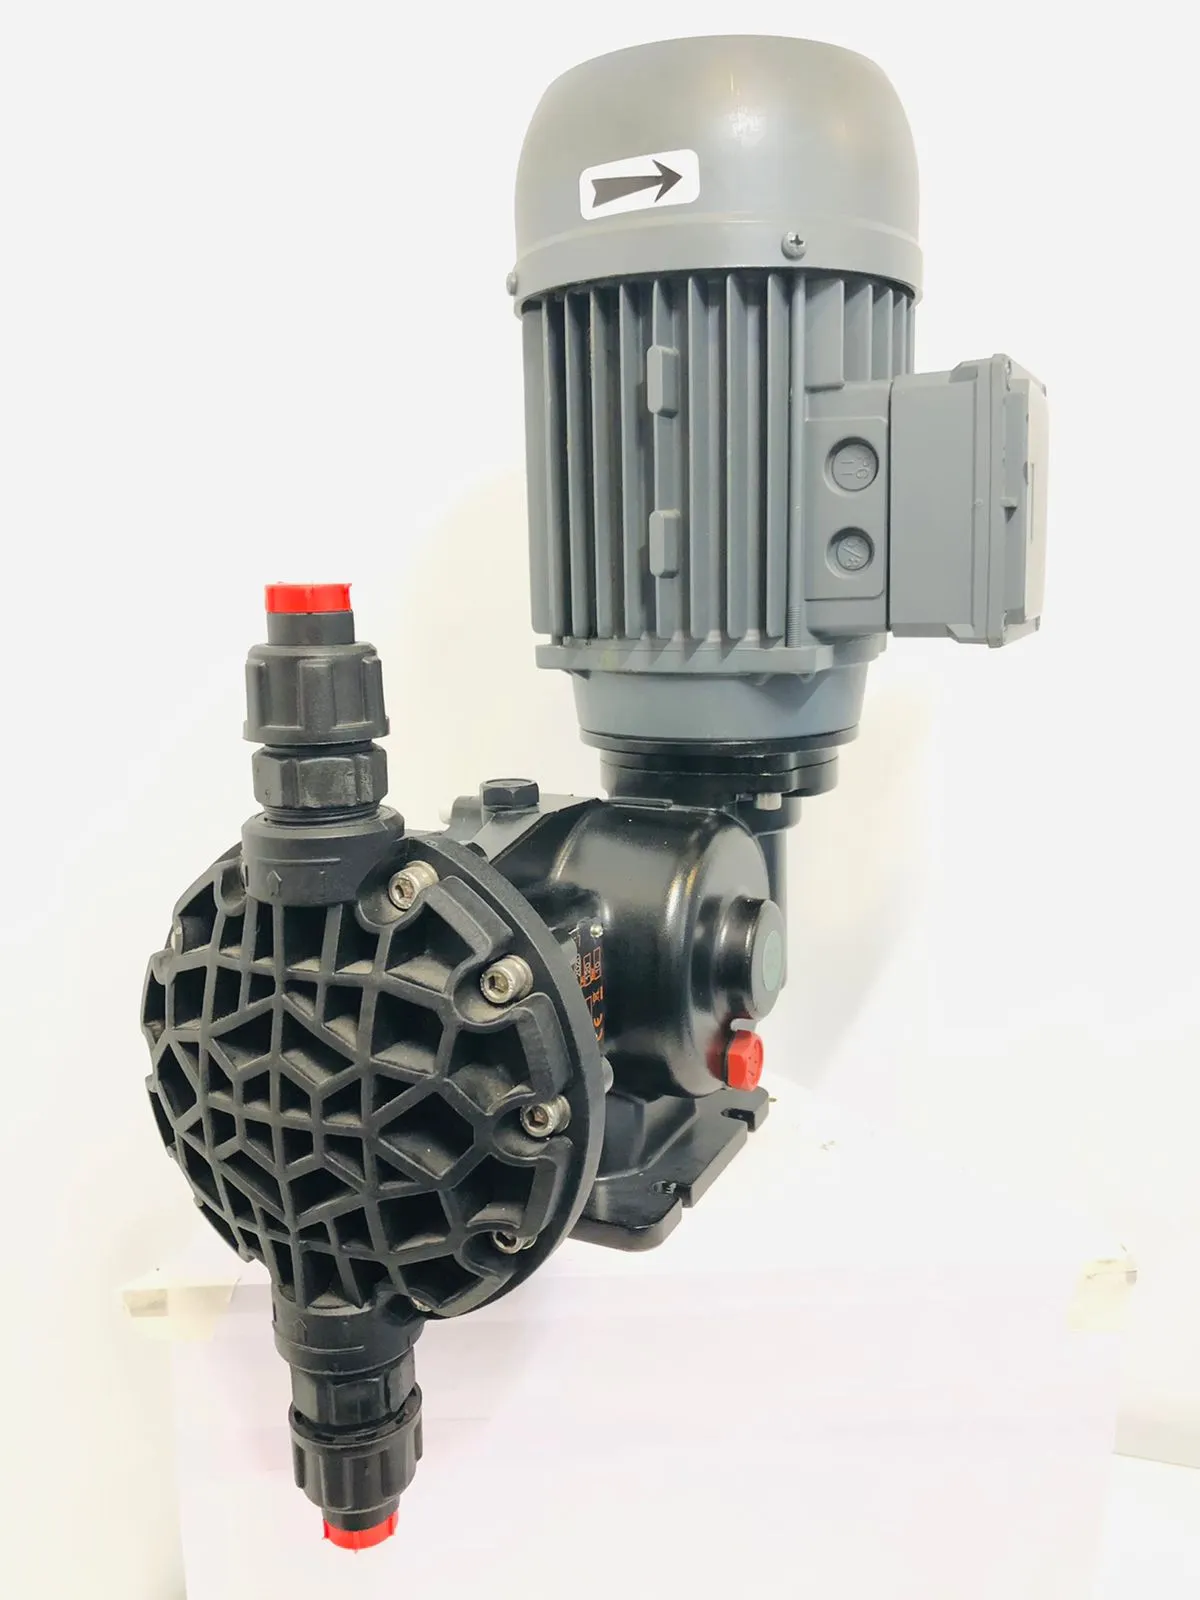 An image of a Motor Driven Diaphragm Pump that can be purchased through Prudence Engineering services.